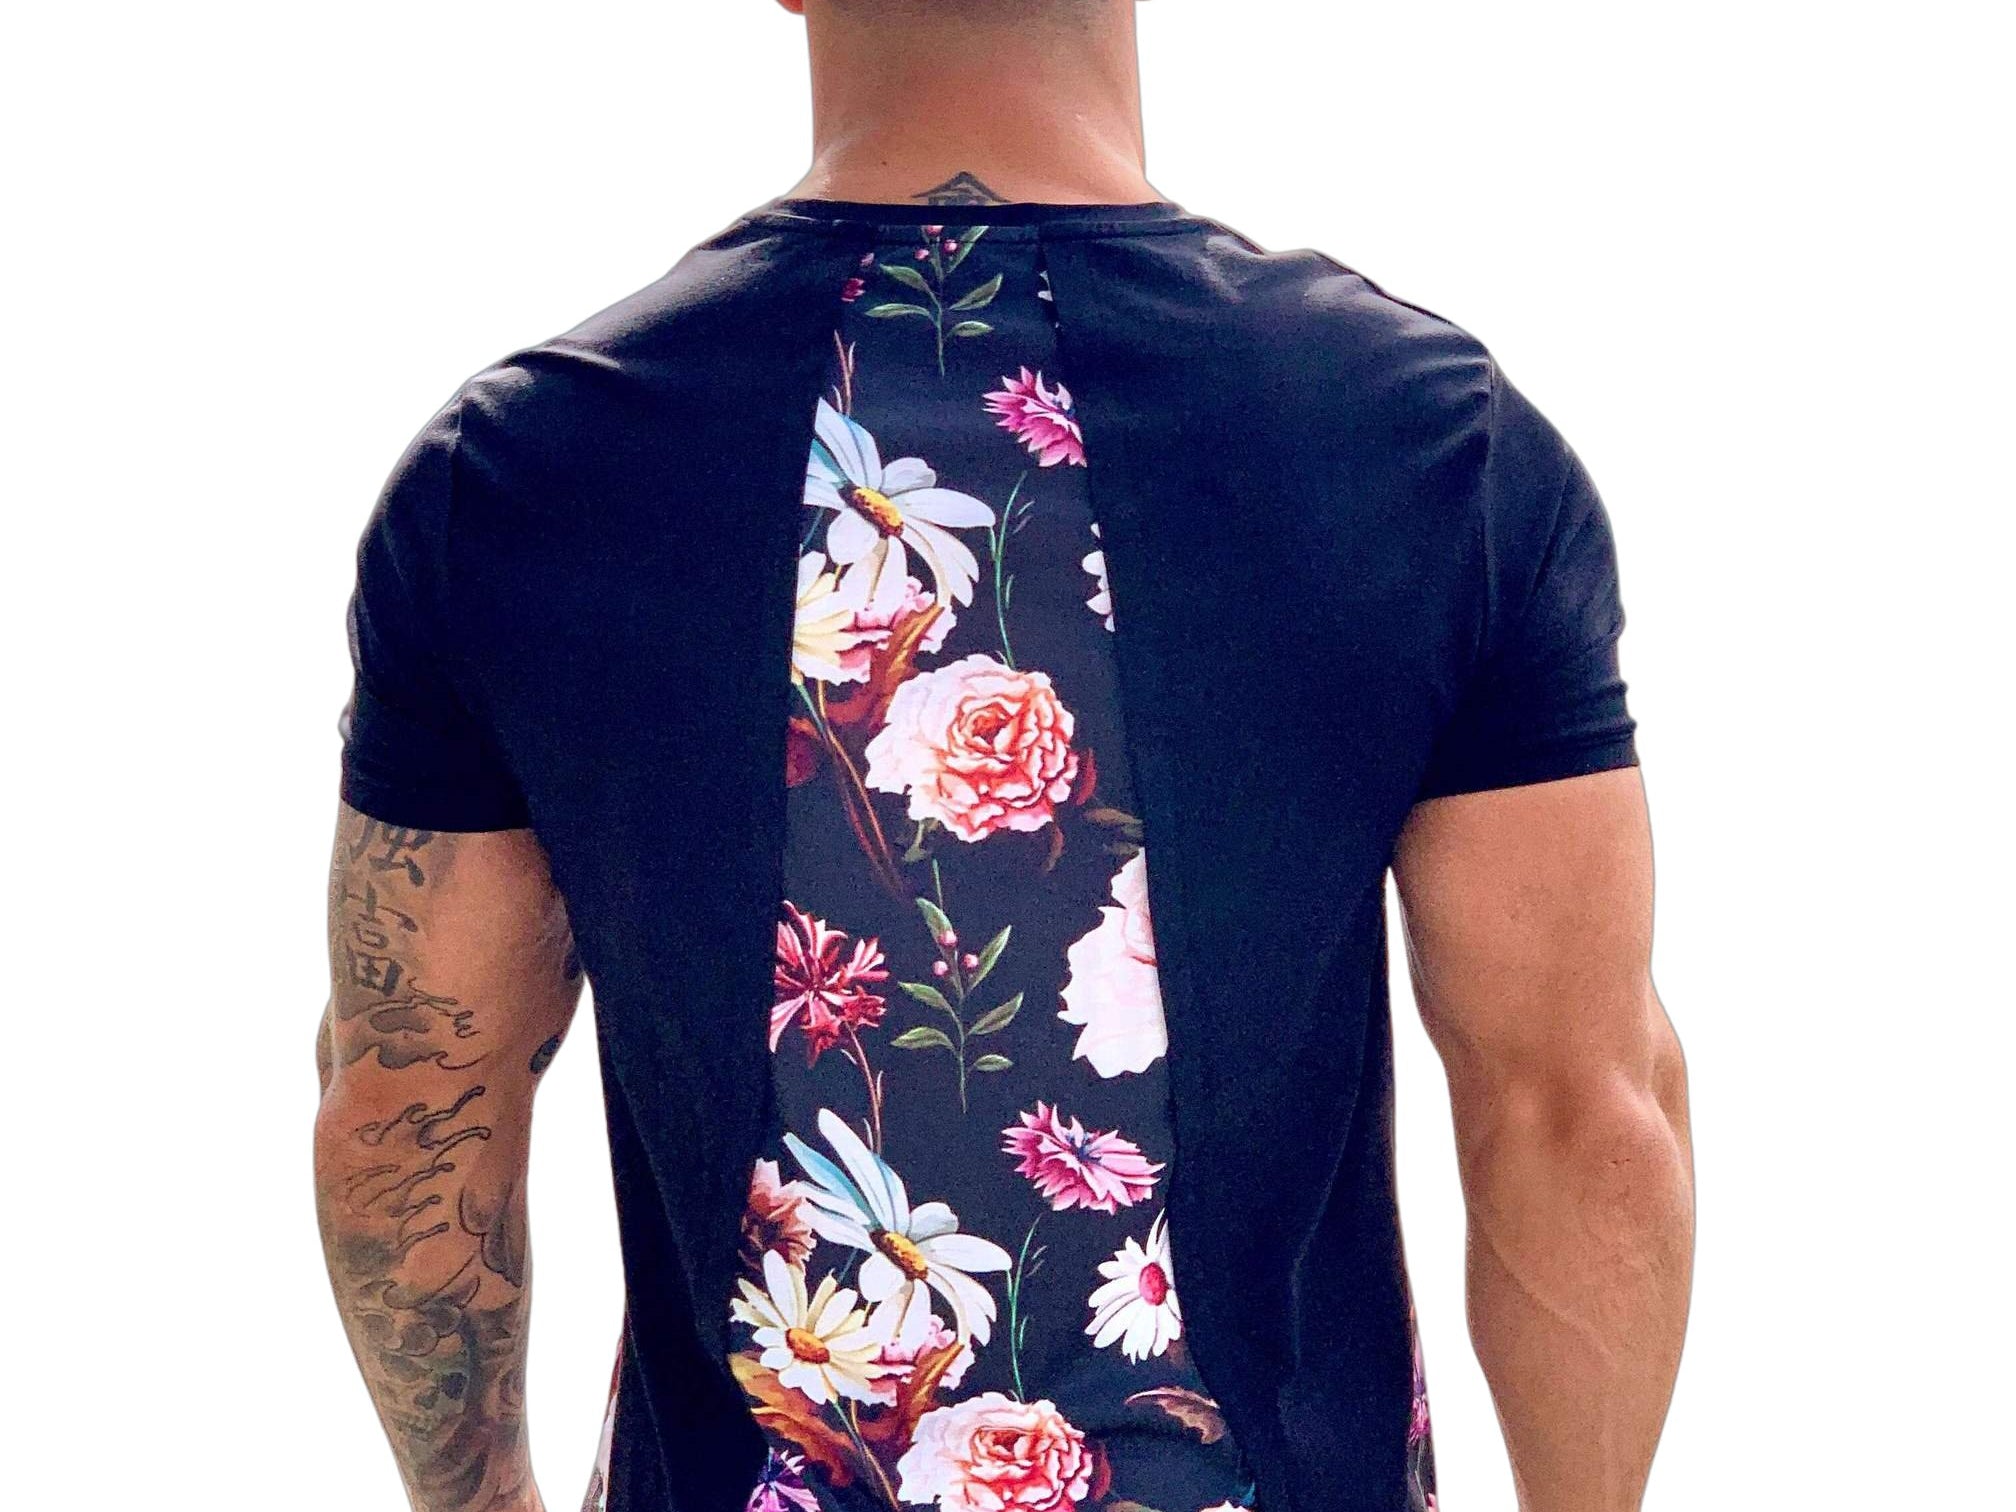 Alluring - Black T-shirt for Men - Sarman Fashion - Wholesale Clothing Fashion Brand for Men from Canada